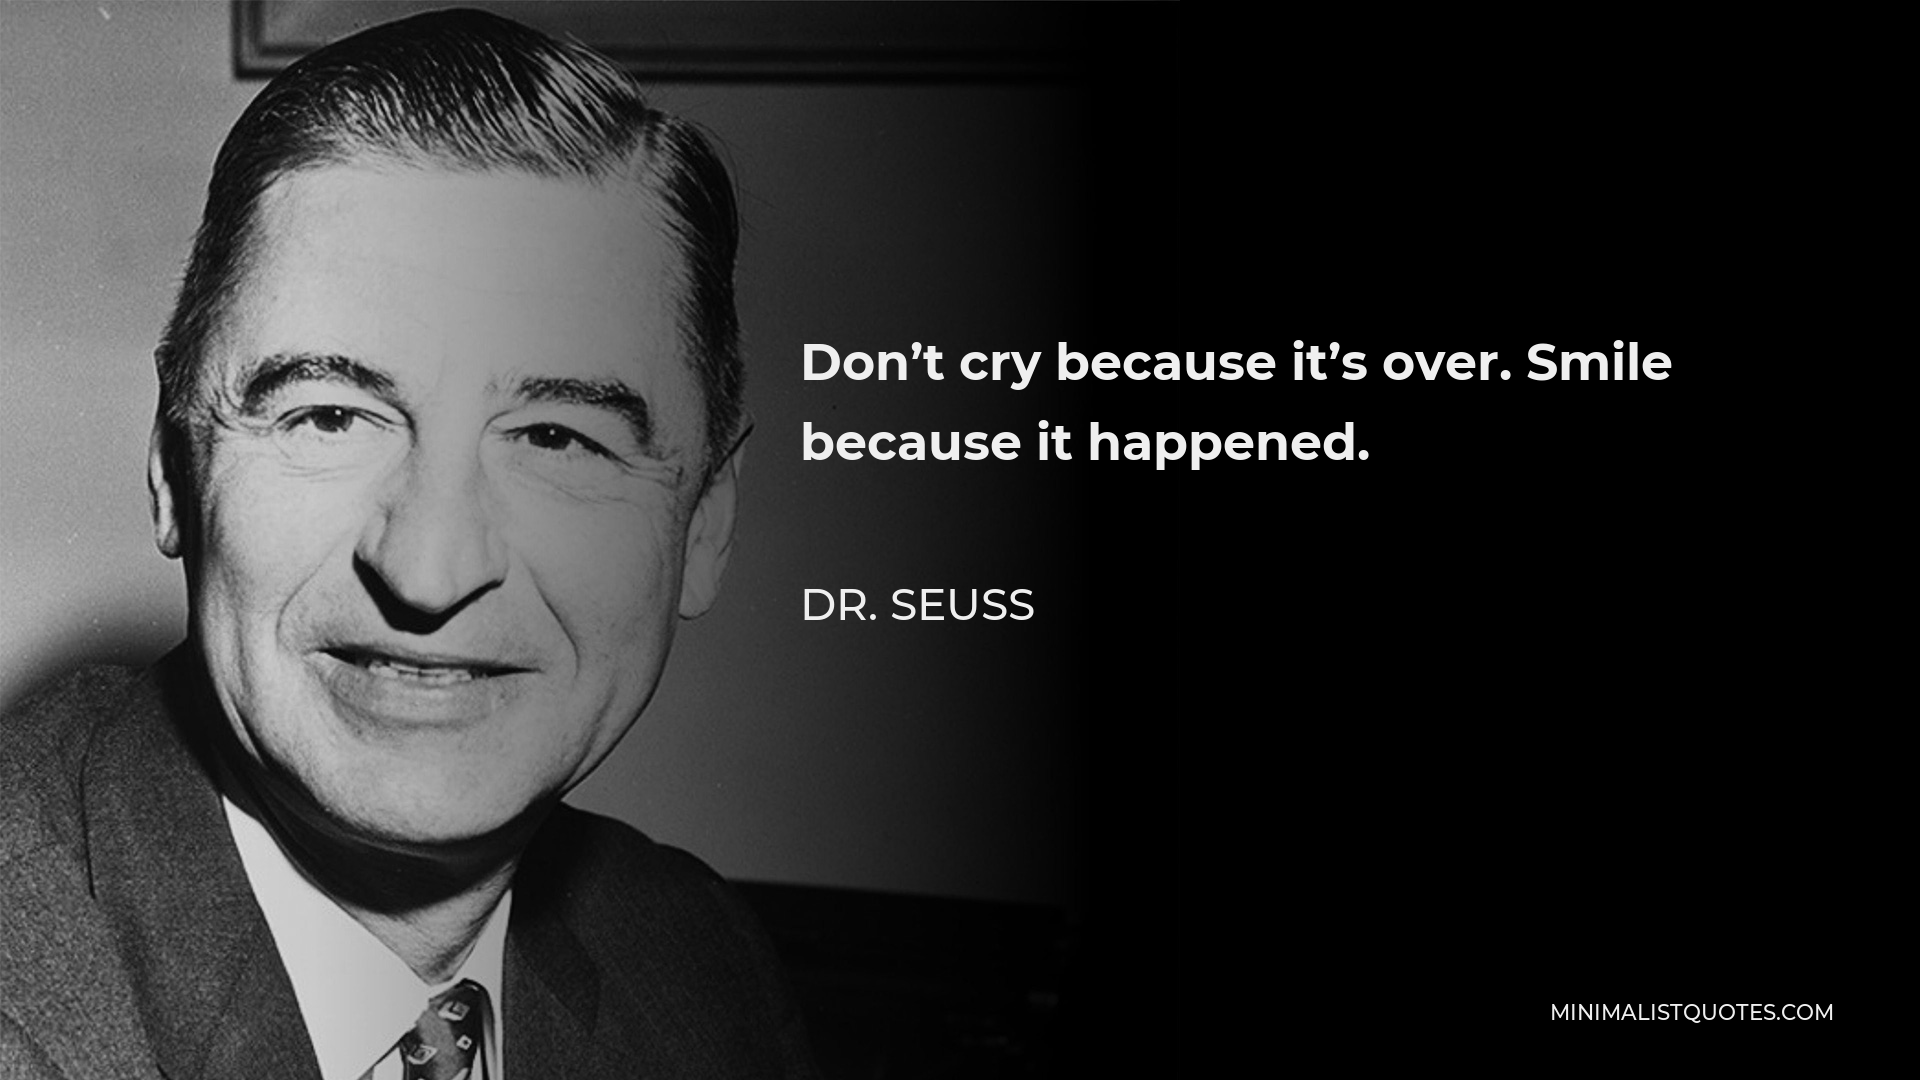 Dr. Seuss Quote: Don't cry because it's over. Smile because it happened.